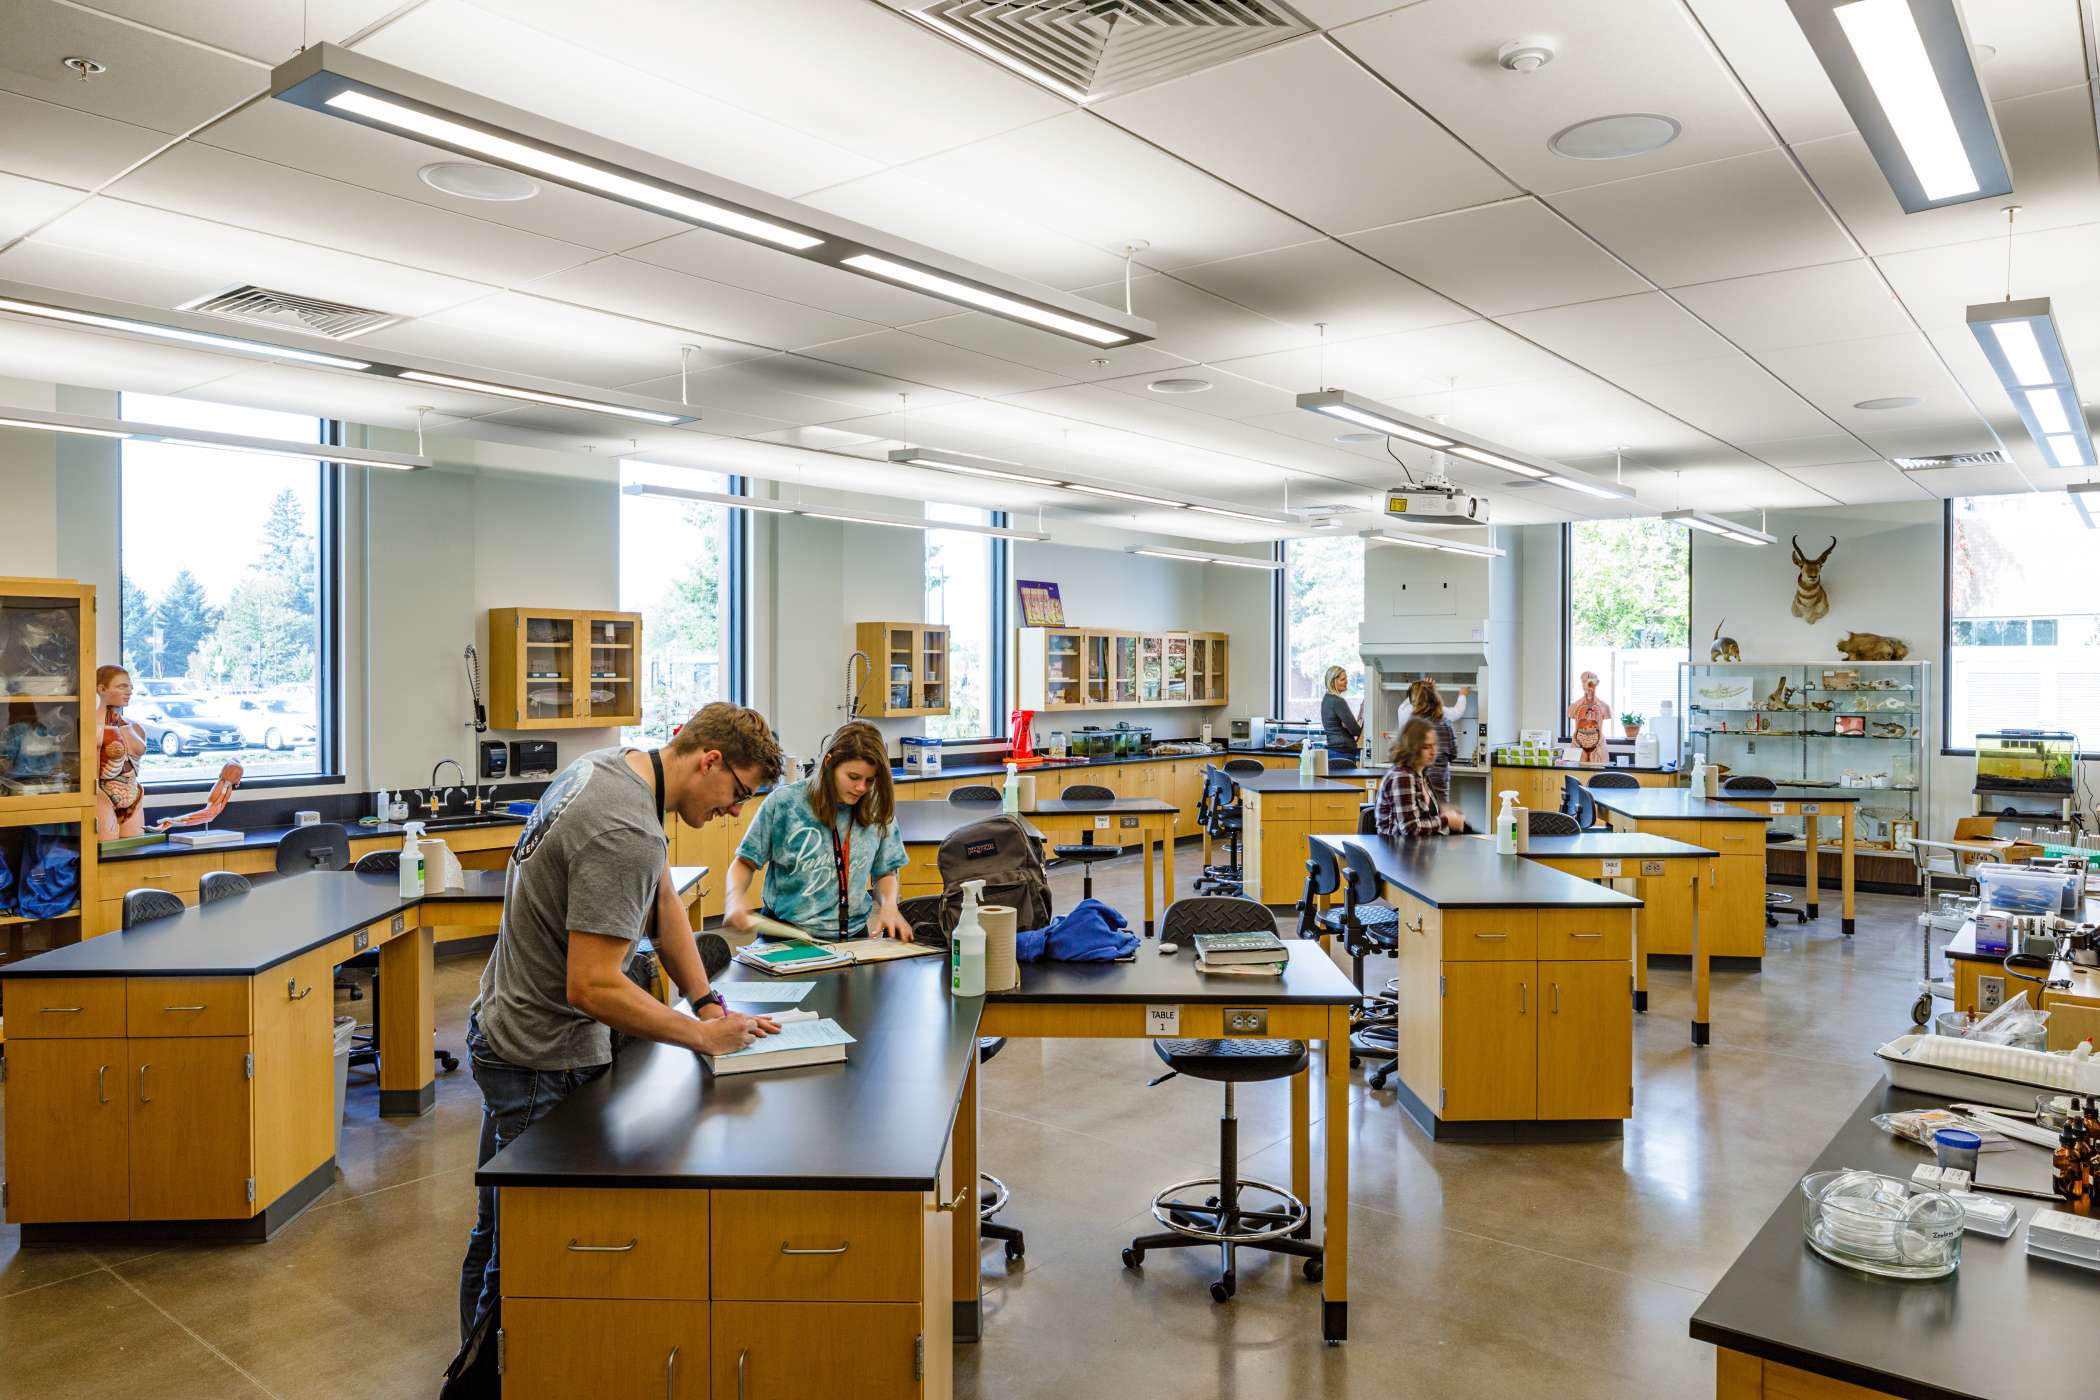 A chemistry lab with students at their standing desks